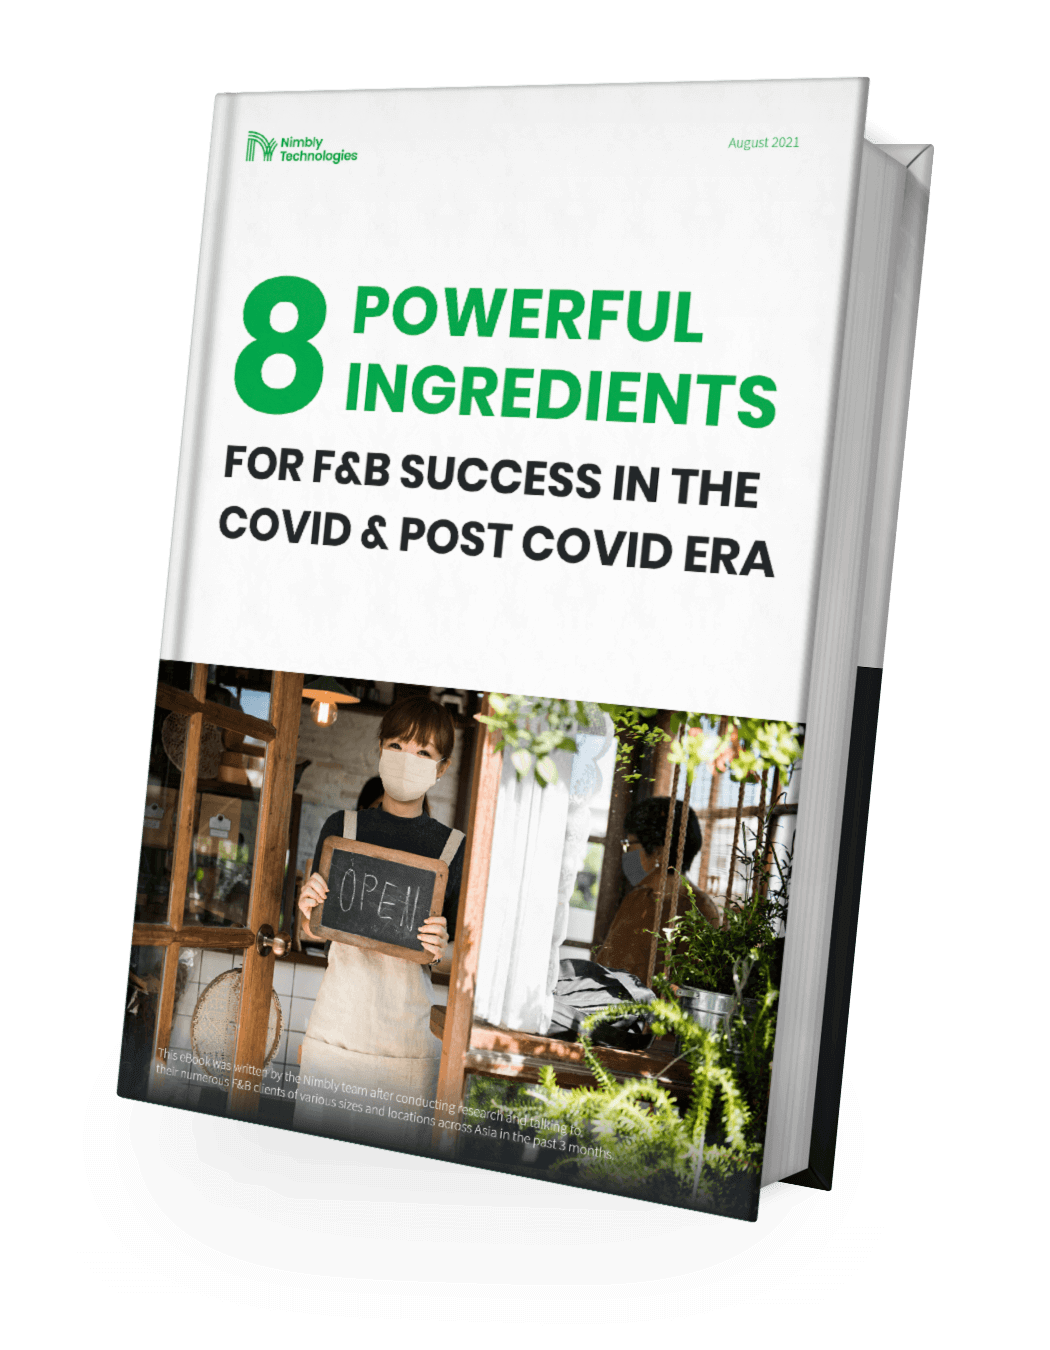 8 Powerful Ingredients for F&B Success in the COVID and Post COVID Era